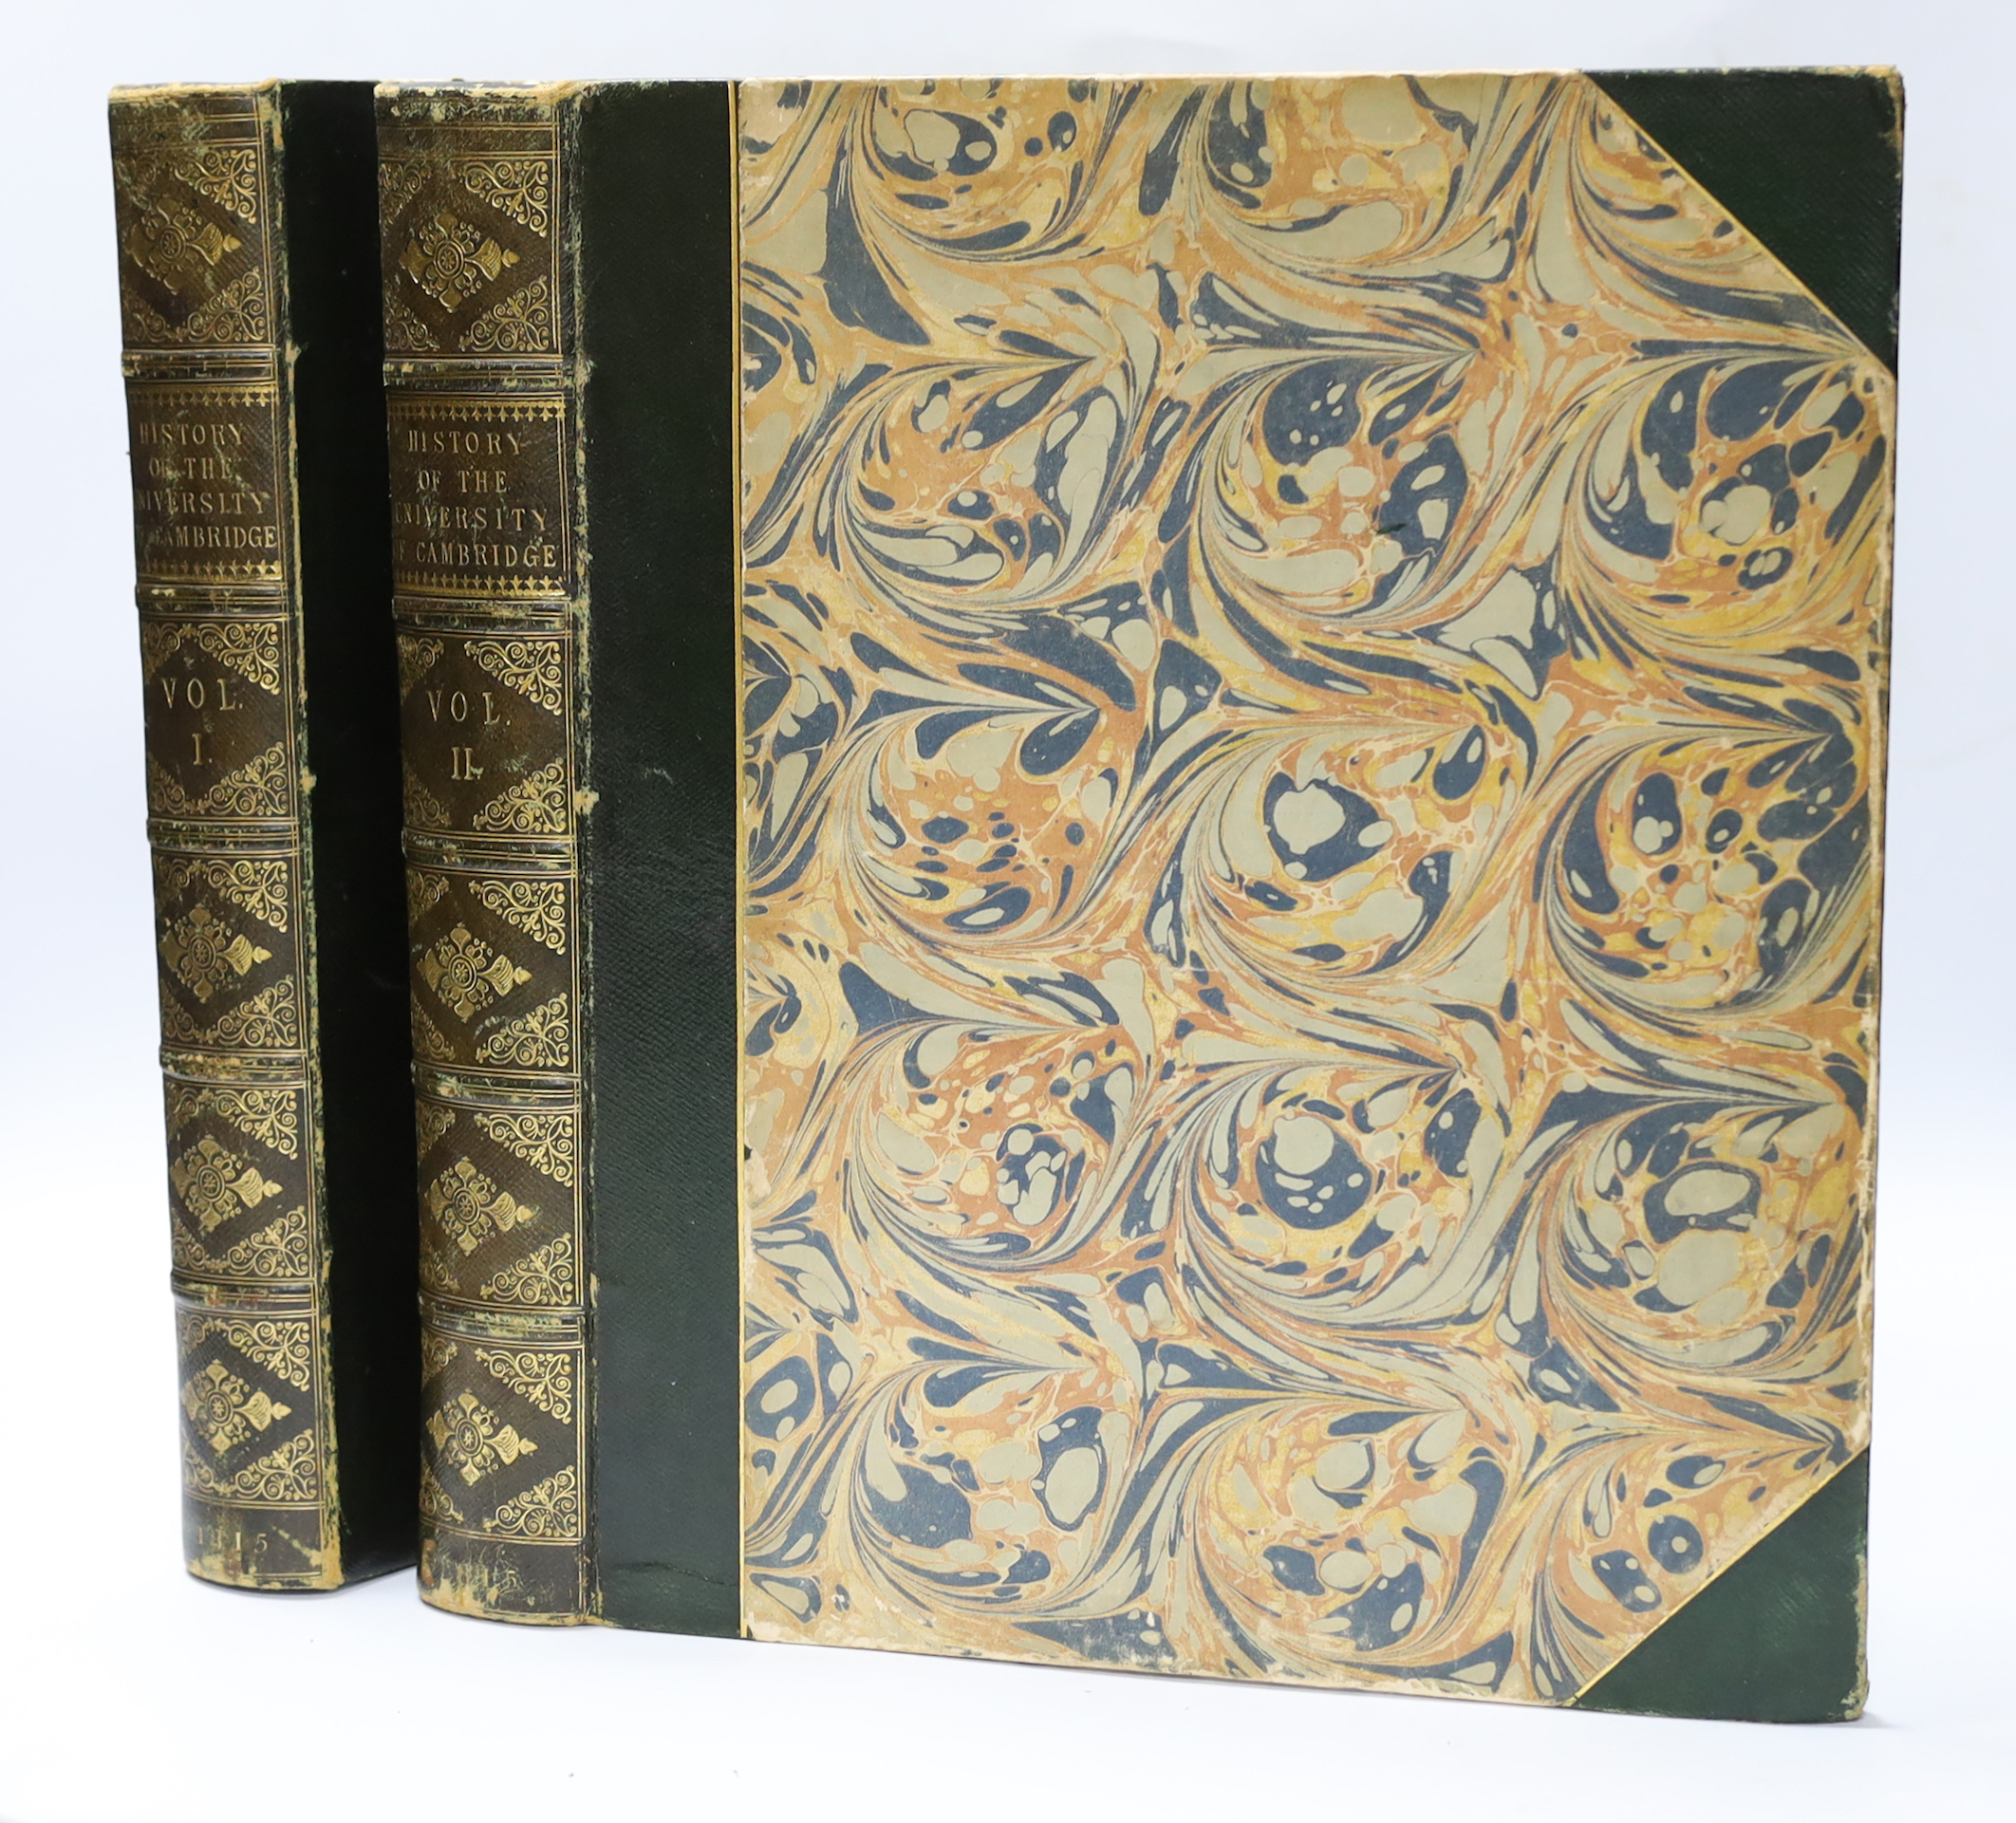 Ackermann (Rudolph, Publisher) - A History of the University of Cambridge, It’s Colleges, Halls, and Public Buildings, 2 vols, 1st edition, folio, half brown morocco gilt, with marbled boards, half-titles, list of subscr